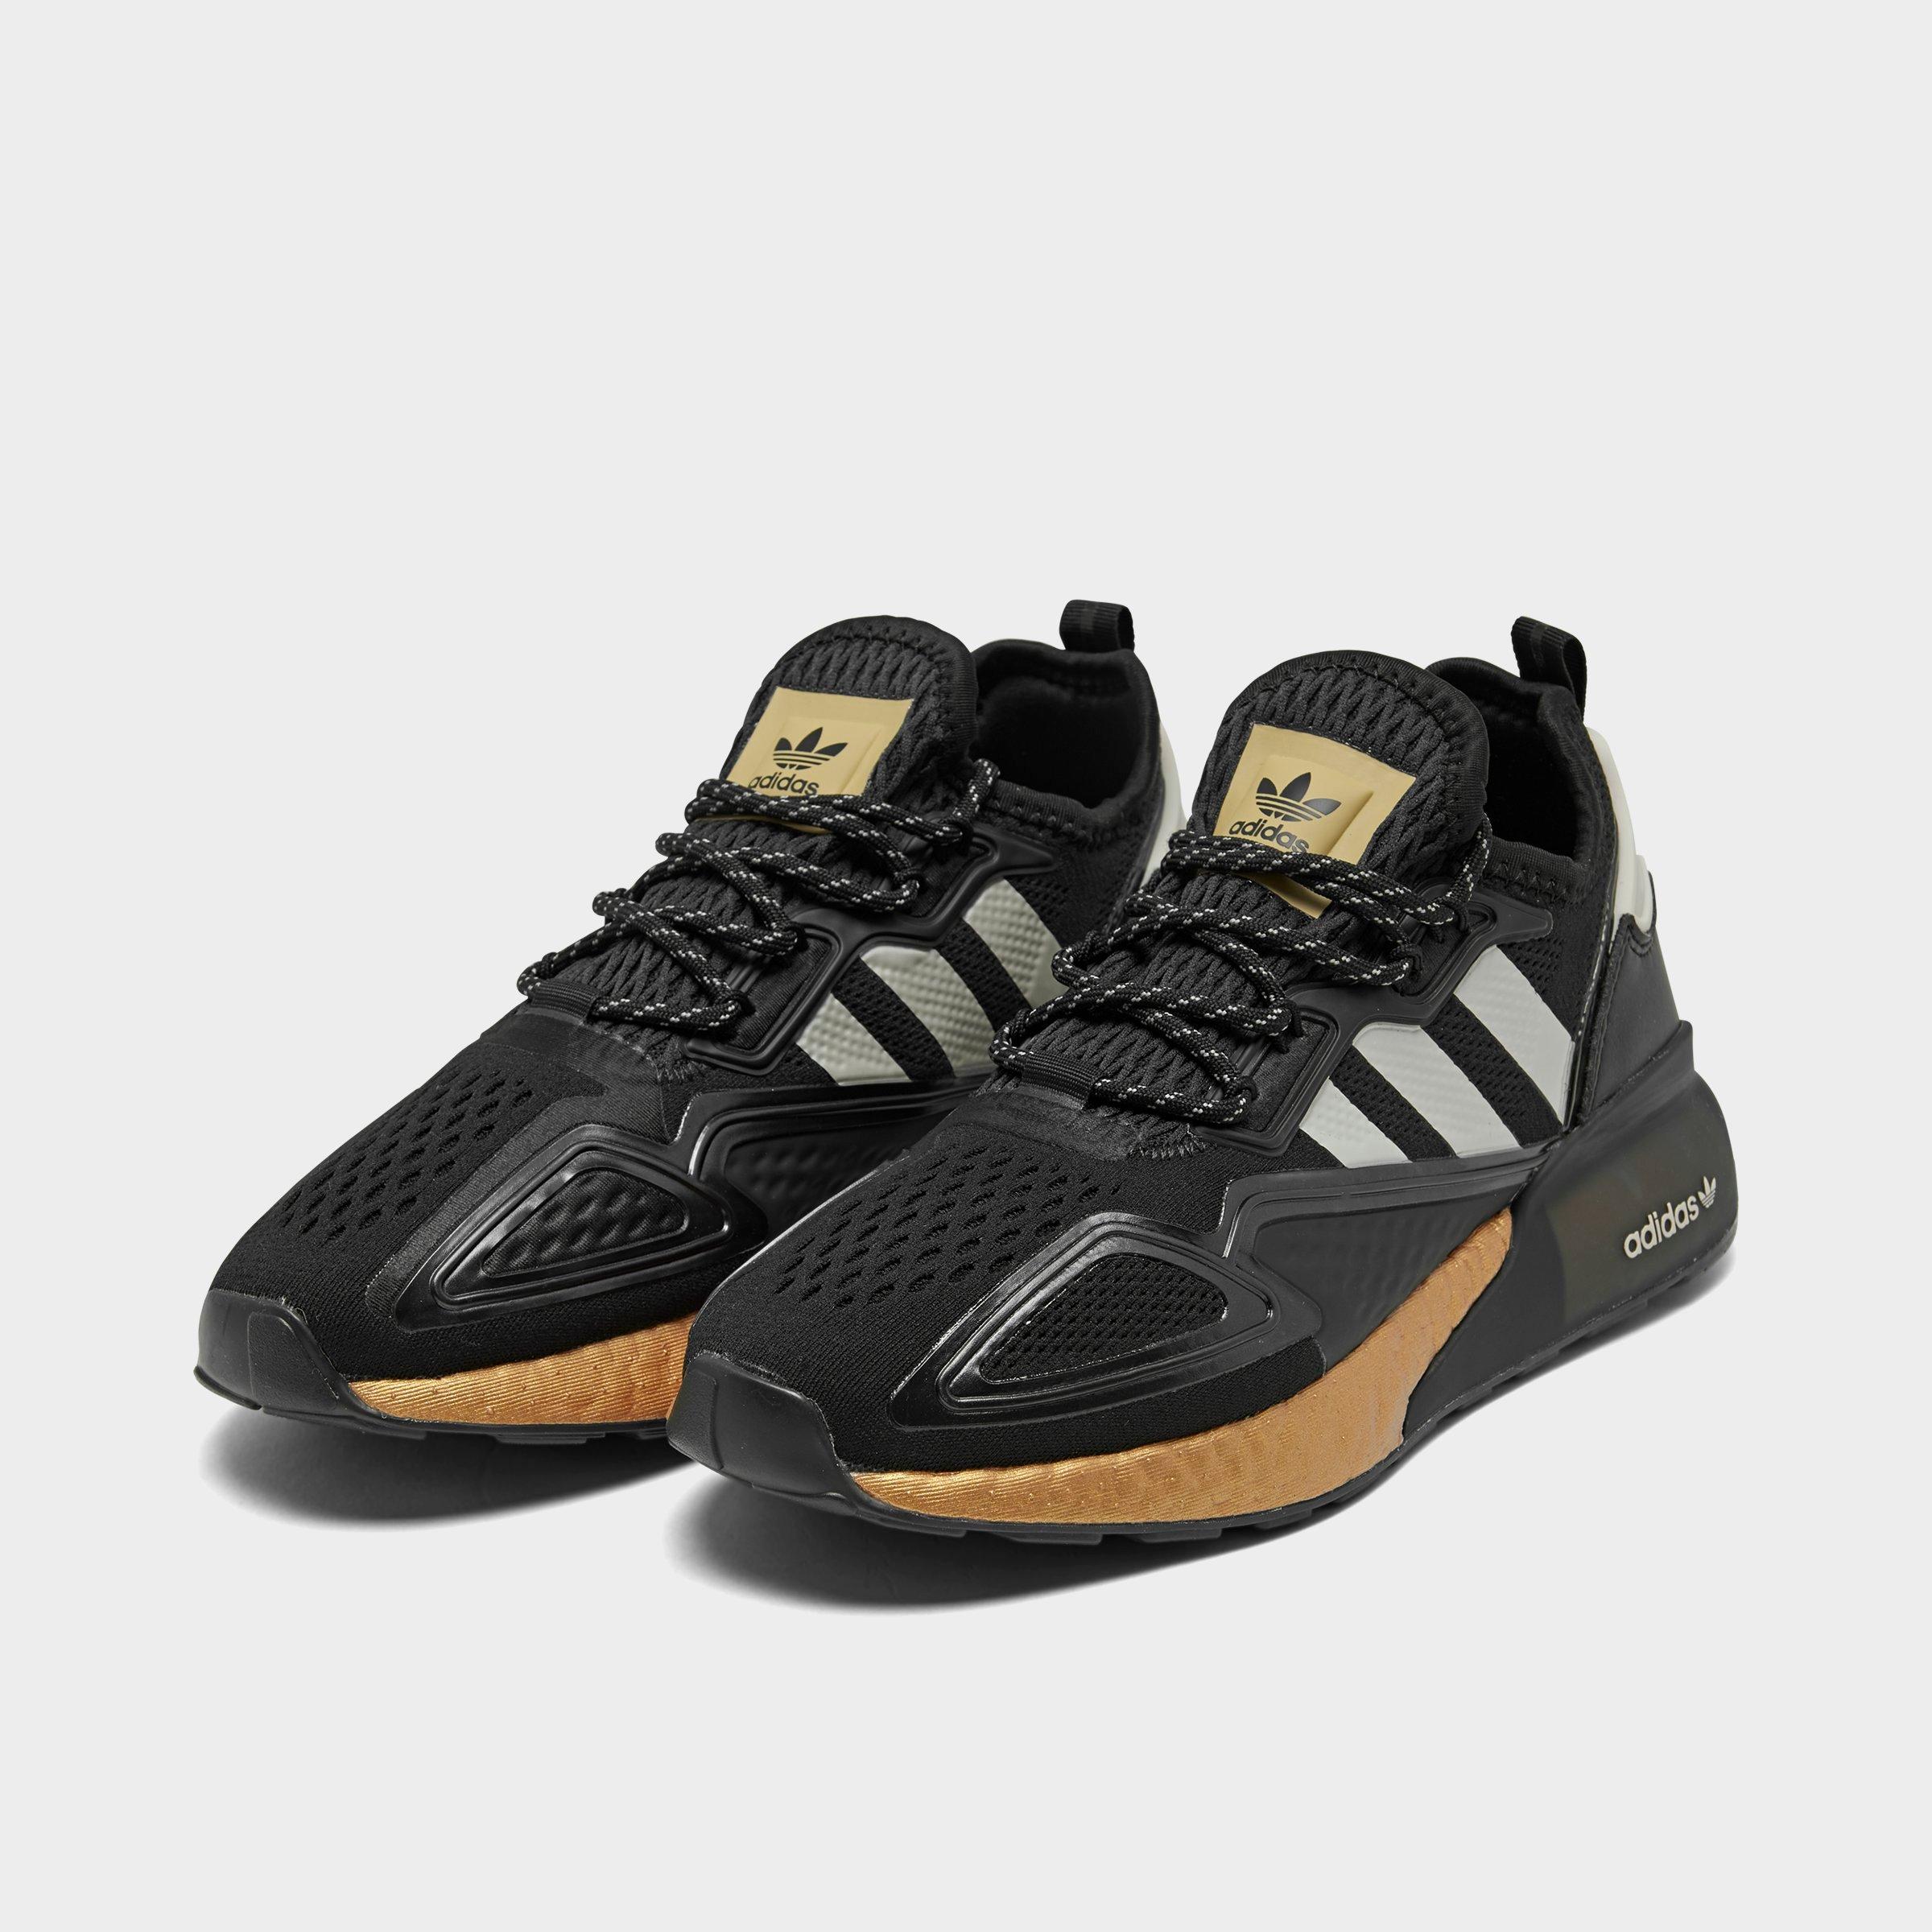 women's black and gold adidas shoes